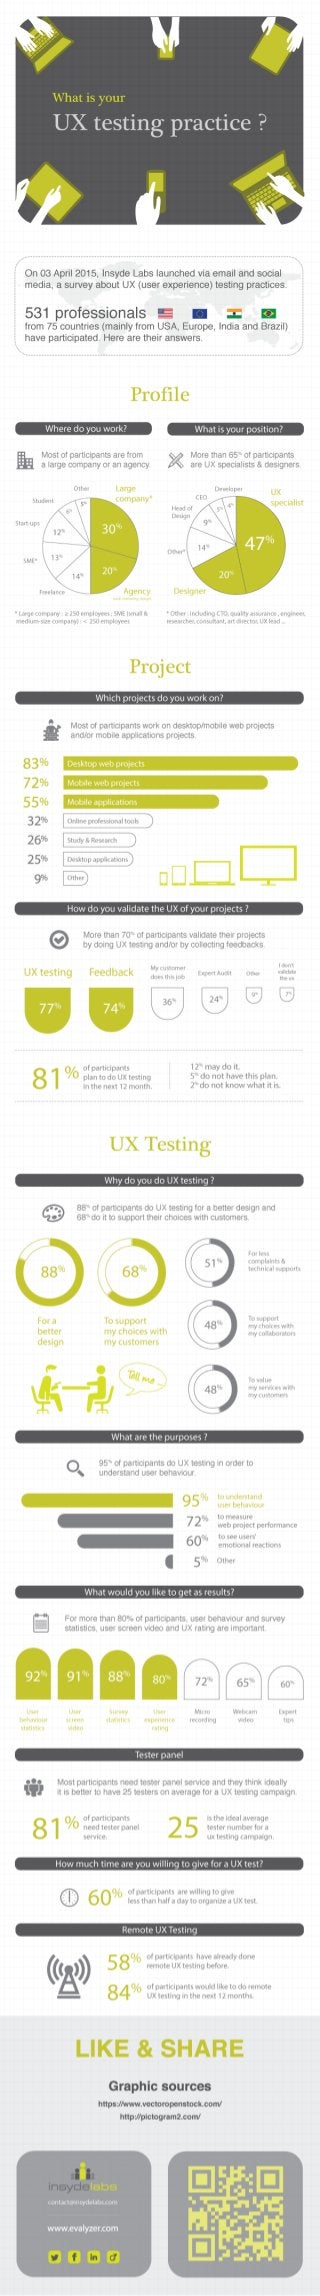 What is your UX testing practice (Survey results) 